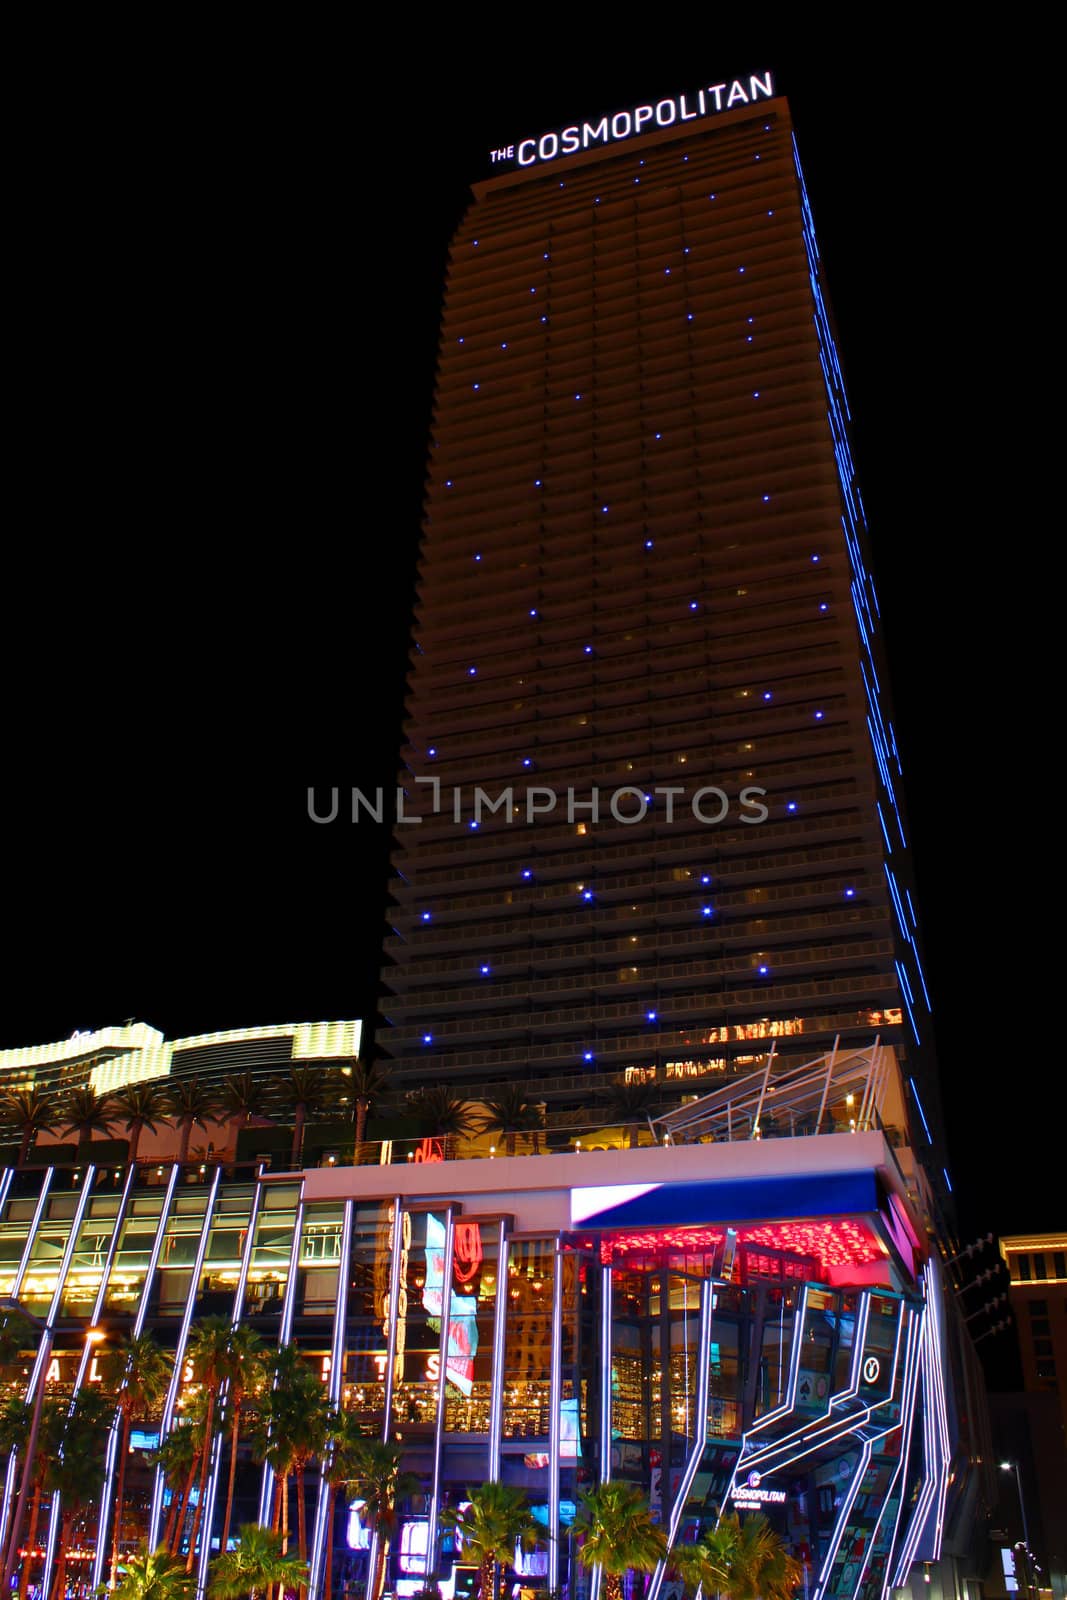 Las Vegas, USA - May 22, 2012: The Cosmopolitan of Las Vegas is a casino and hotel that opened in 2010 on the famous Las Vegas Strip.  Pictured here is the highrise hotel tower with parallel blue lights at night.